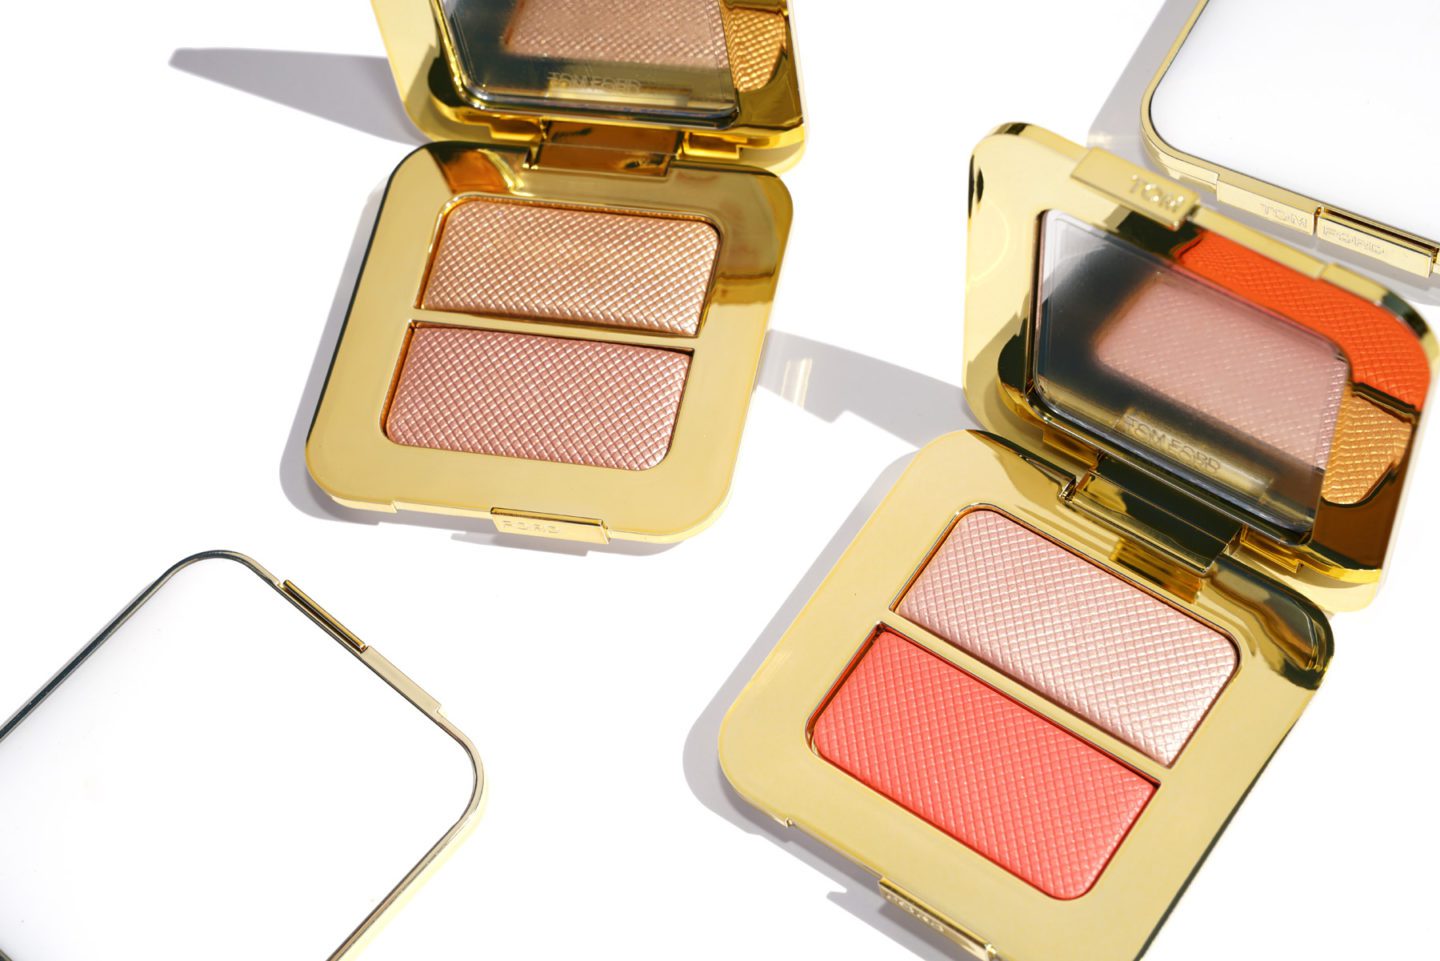 Tom Ford Summer Soleil Reflects Gilt and Paradise Lust | The Beauty Look Book